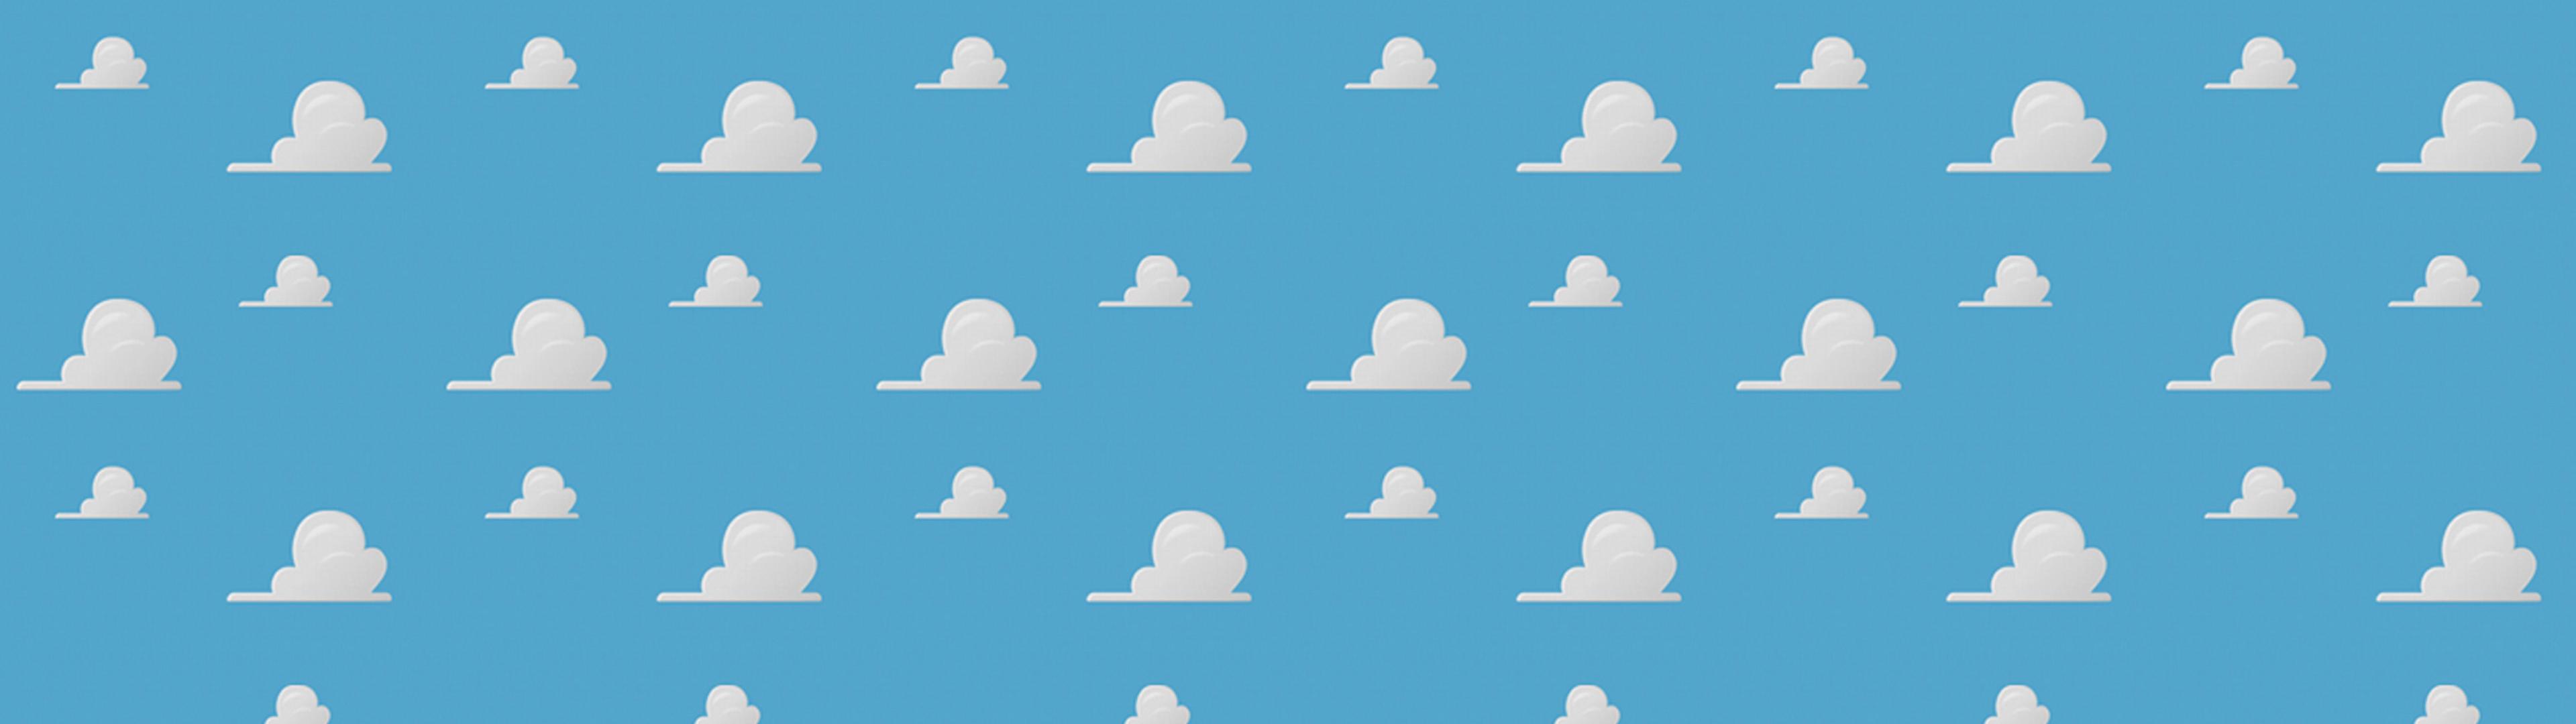 clouds wall toy story ts3 Ultra or Dual High Definition 2560x1440